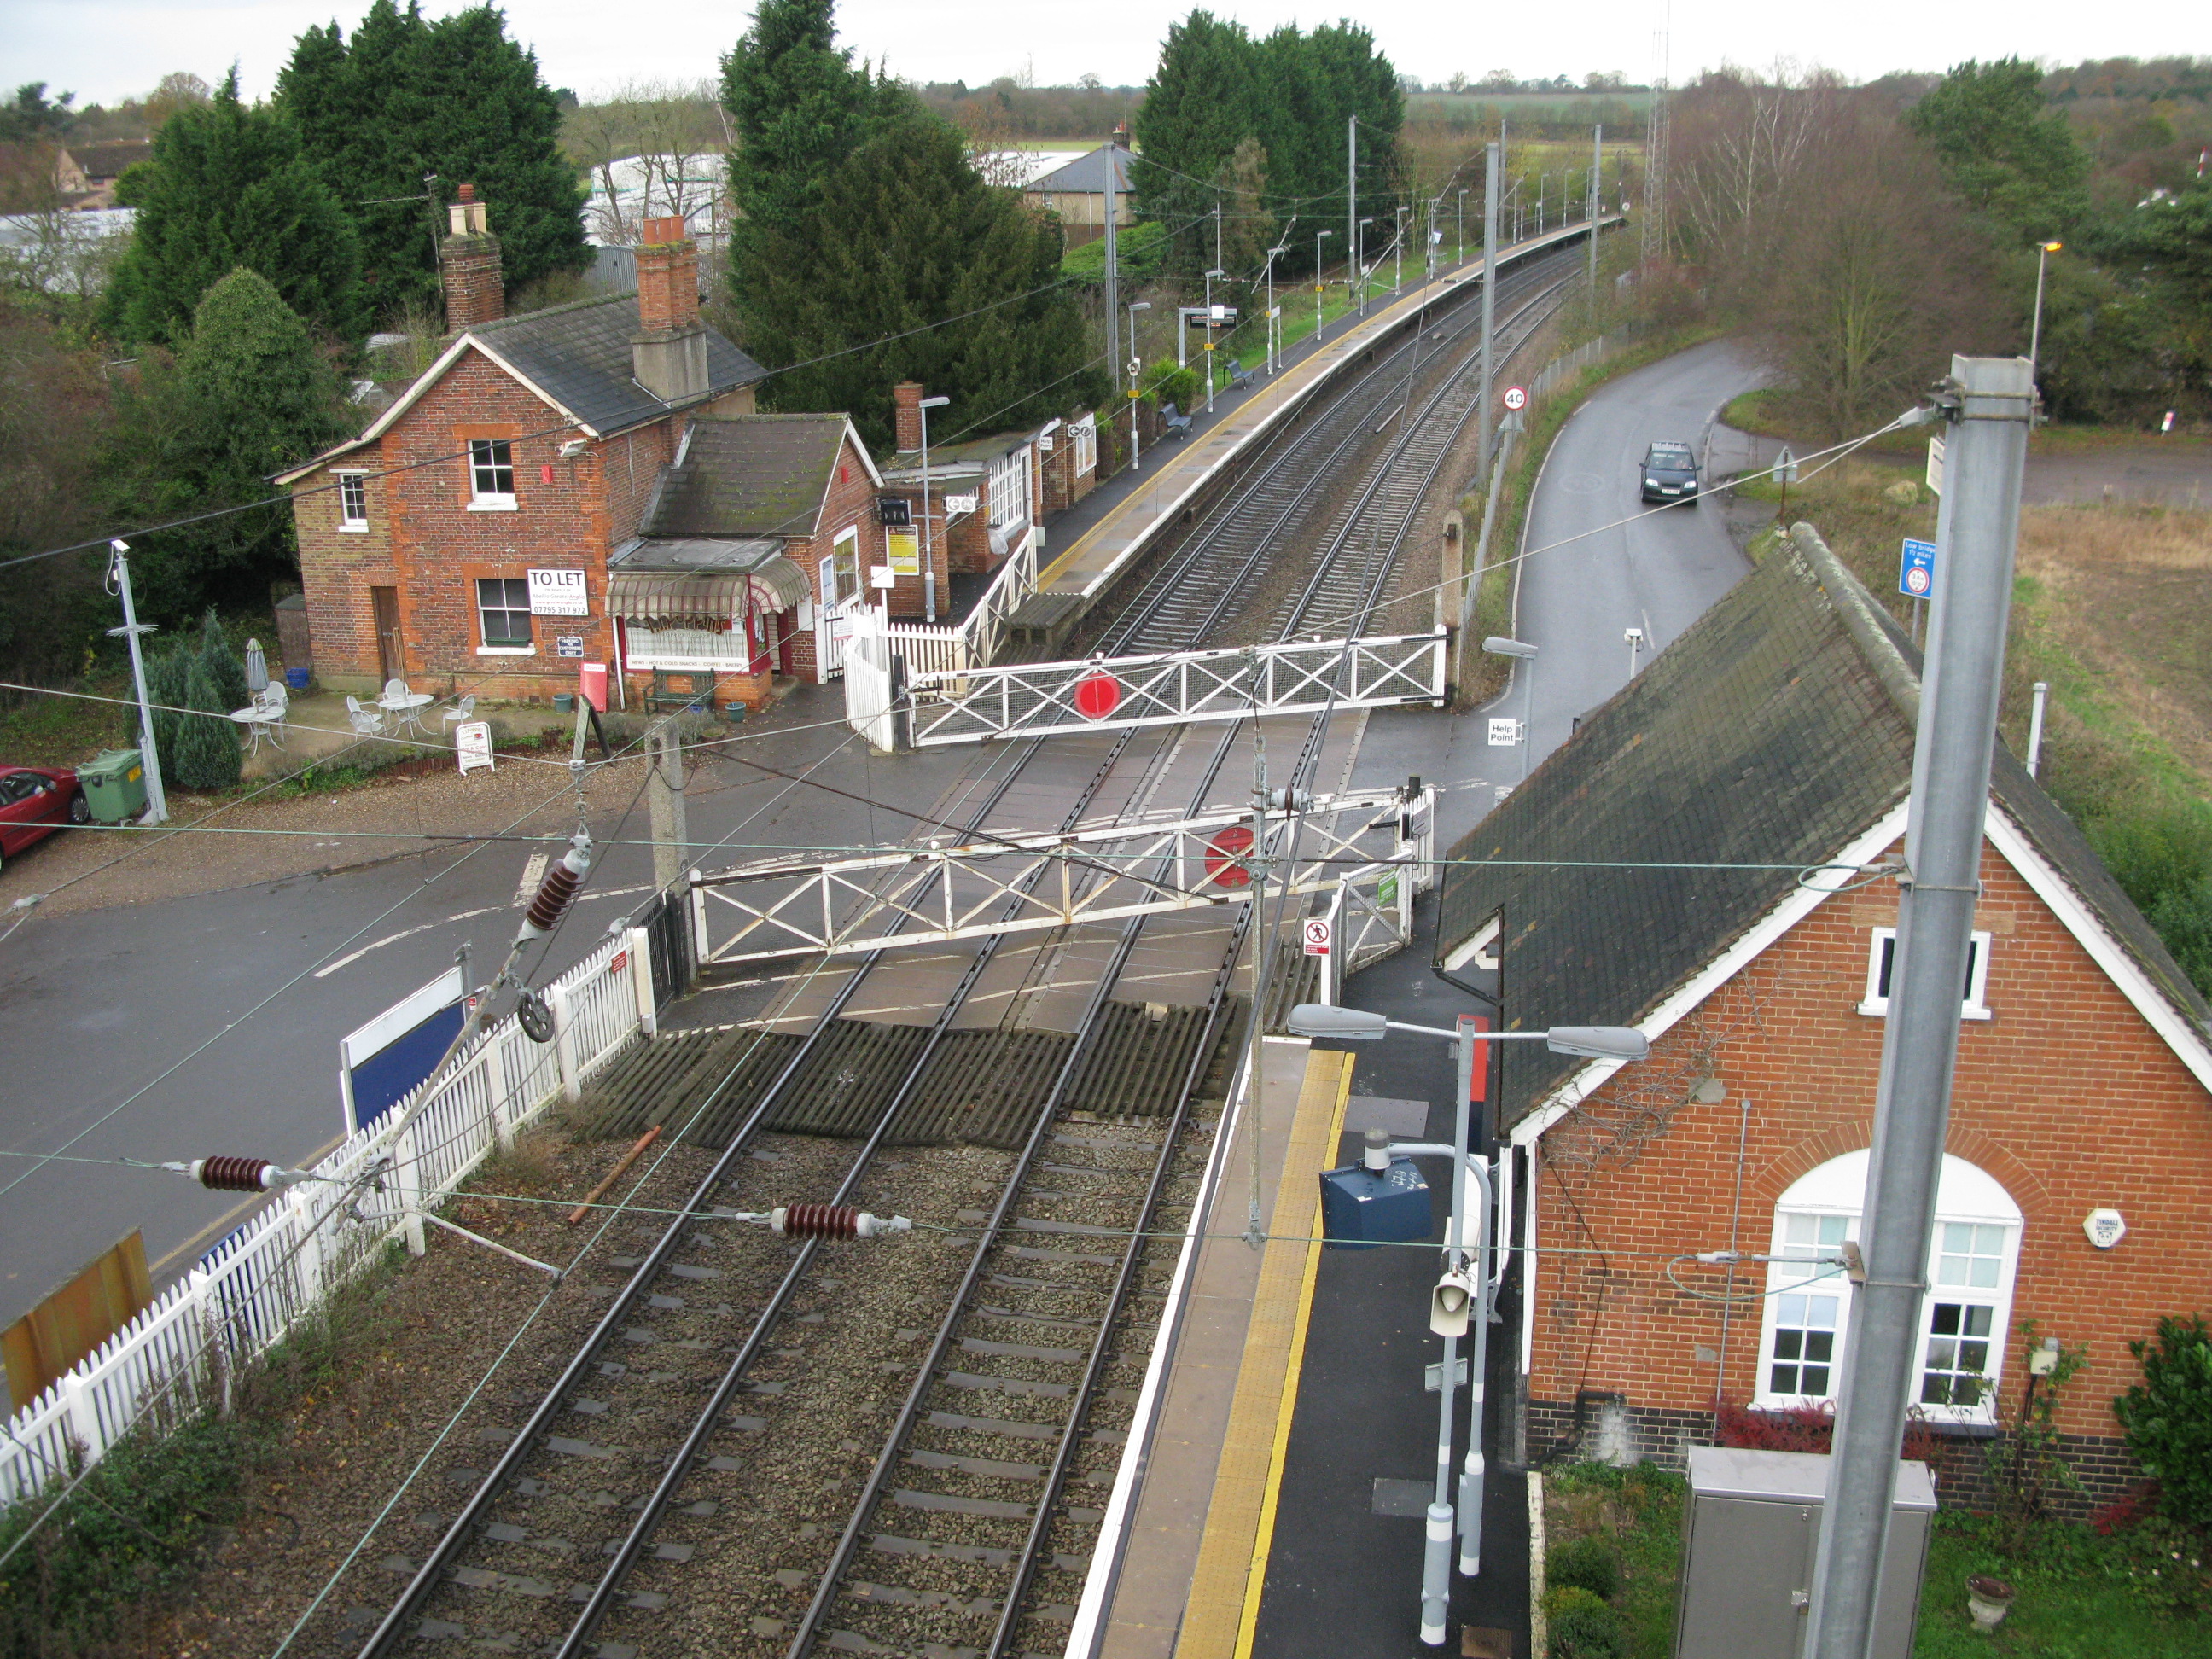 Elsenham station, view looking north from footbridge, shows crossing between staggered Up (lower right) and Down (upper left) platforms, and track curvature (Photo: © London Intelligence)